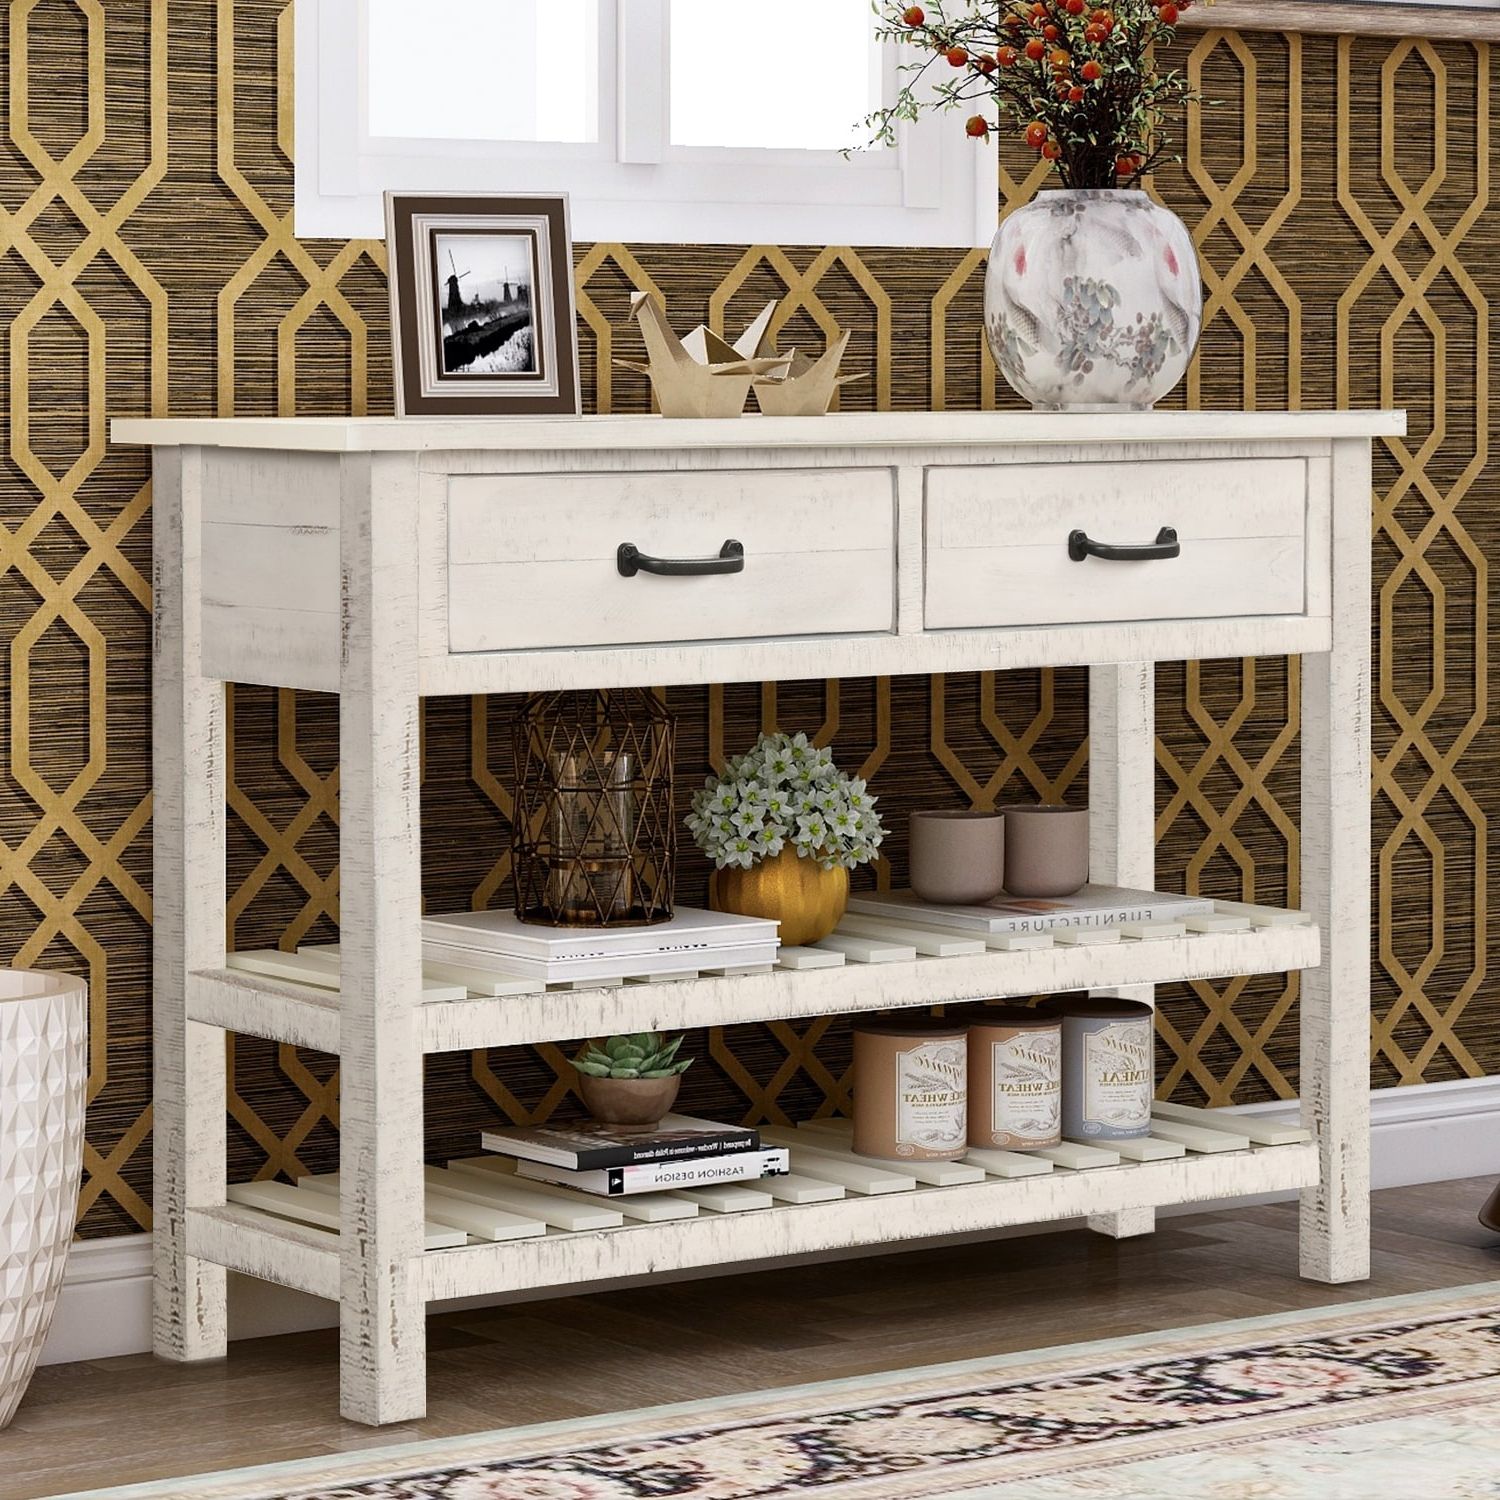 Most Recent Entry Console Sideboards Regarding Retro Console Table Sideboard Cabinet For Entryway With 2 Drawers And 2  Slatted Bottom Shelves, Antique White – Bed Bath & Beyond –  (View 6 of 15)